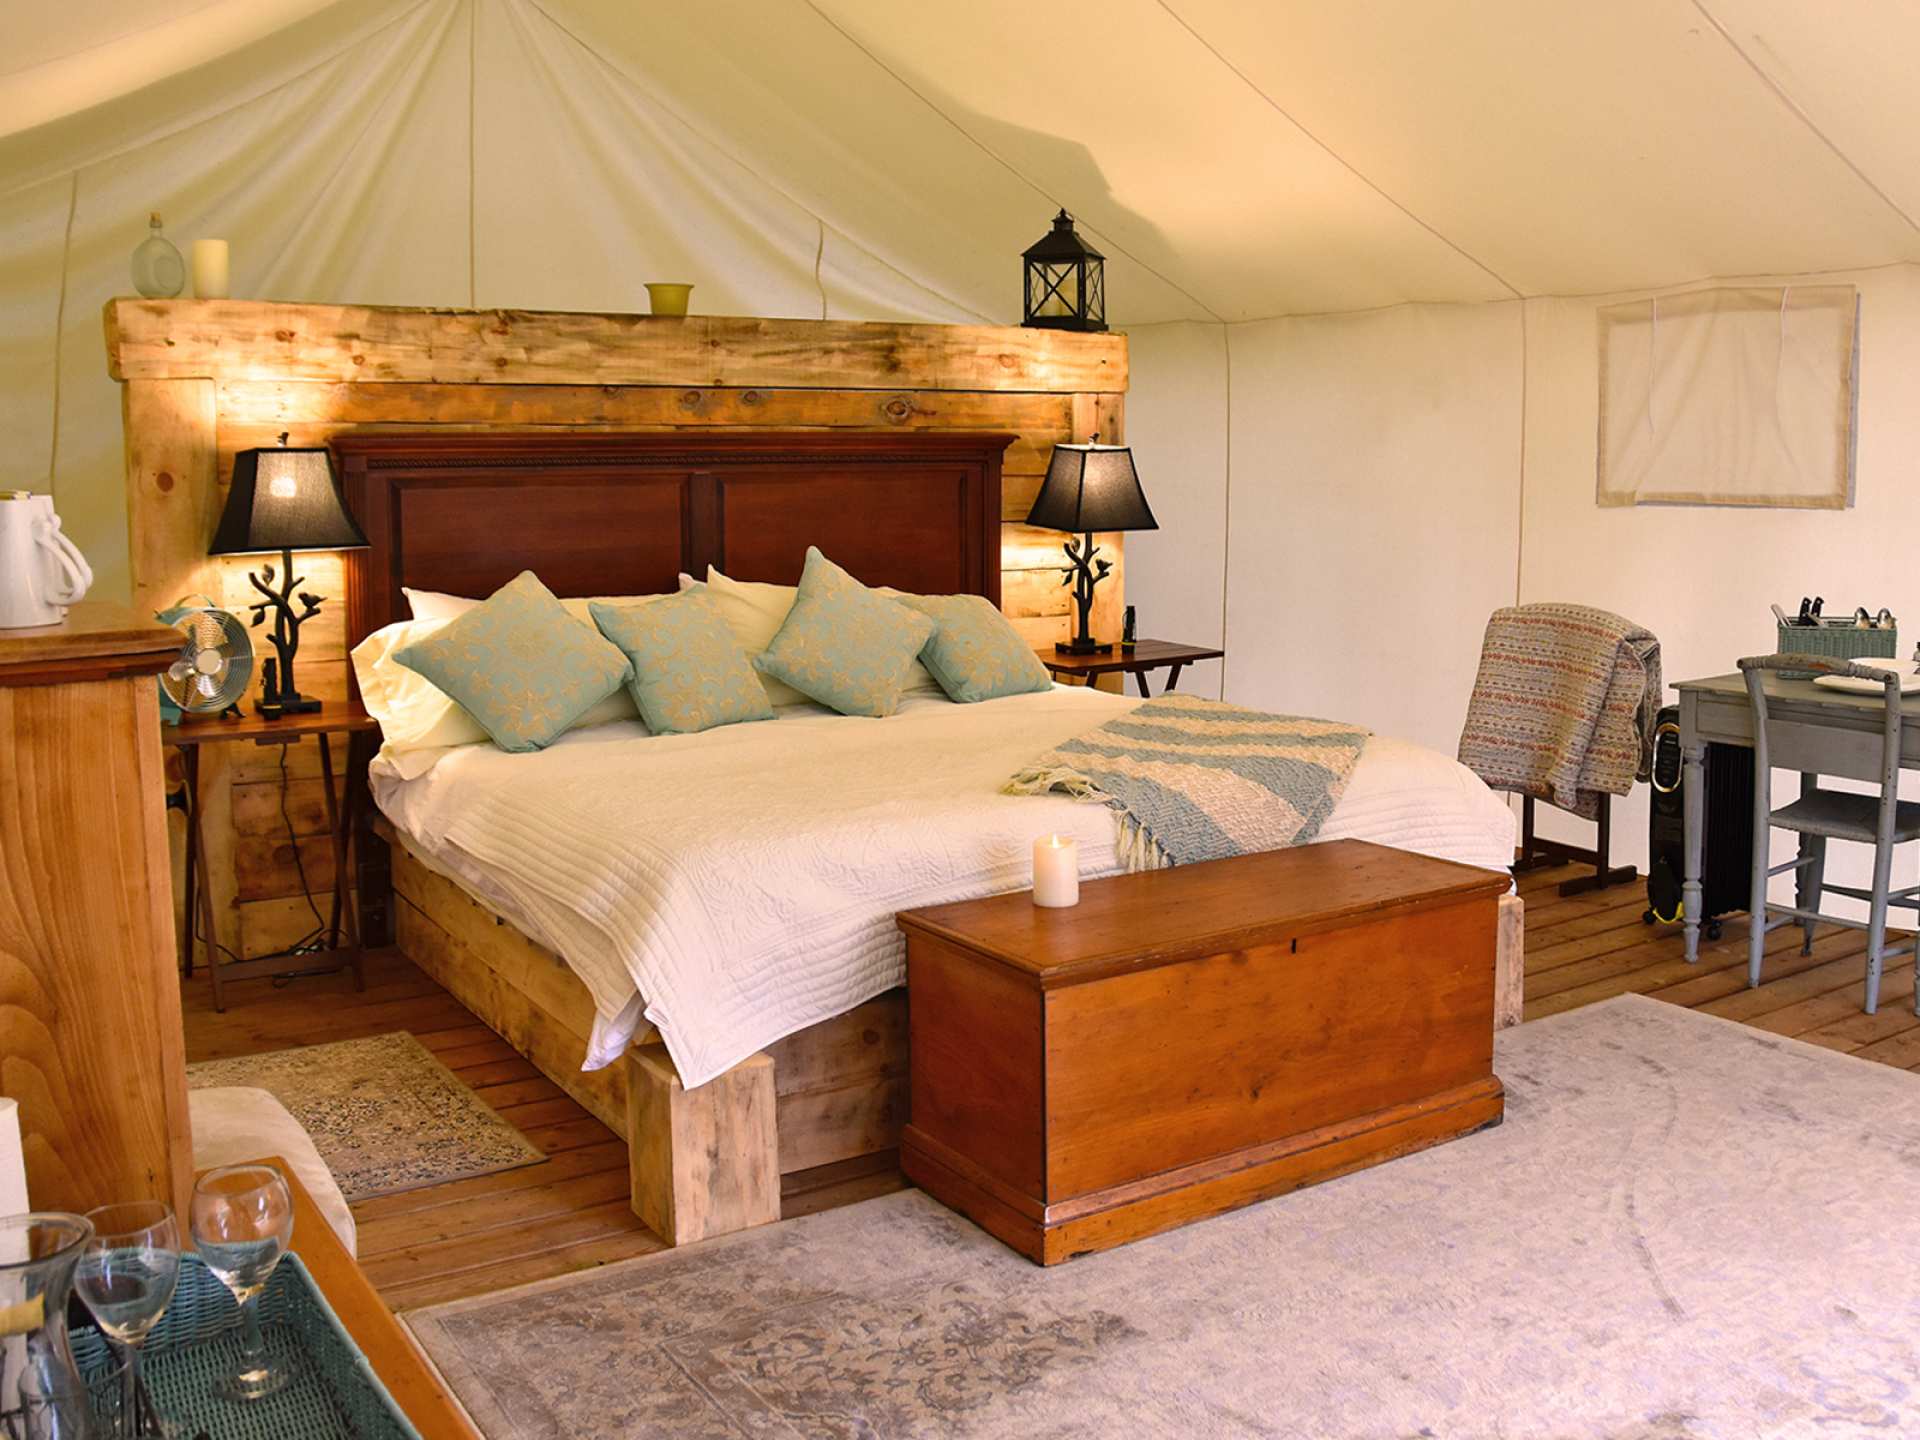 Ontario wellness retreats | The inside of a luxurious tent at Whispering Springs Ontario wellness retreat